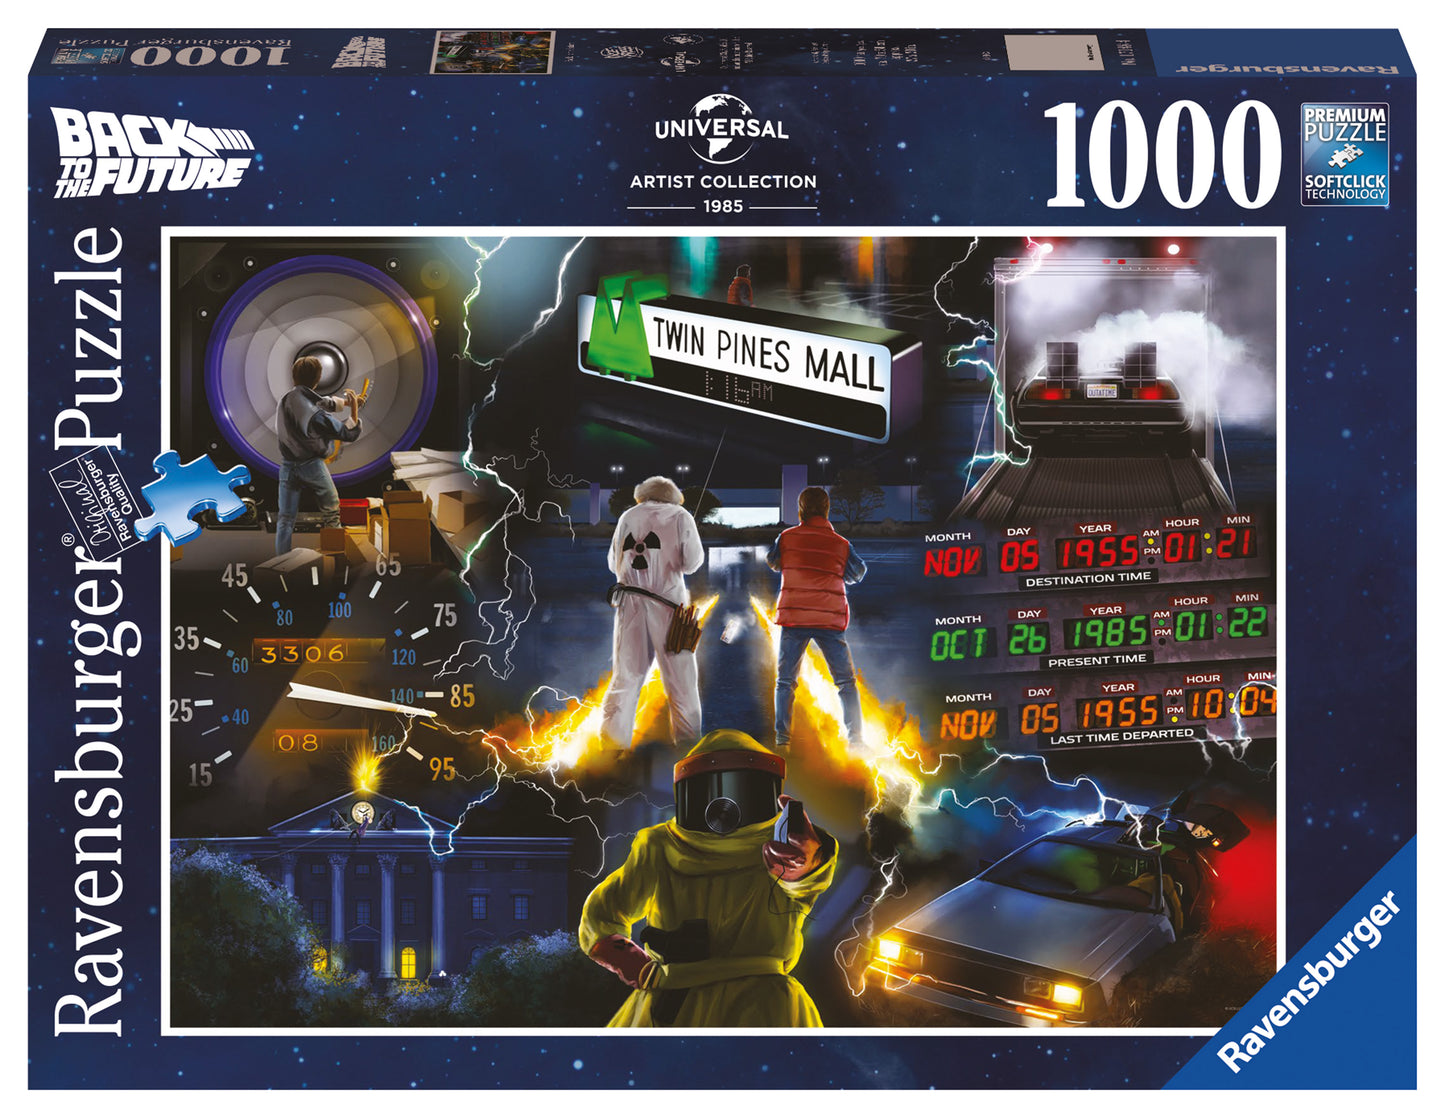 Ravensburger - Universal Vault Collection, Back to the Future - 1000 Piece Jigsaw Puzzle